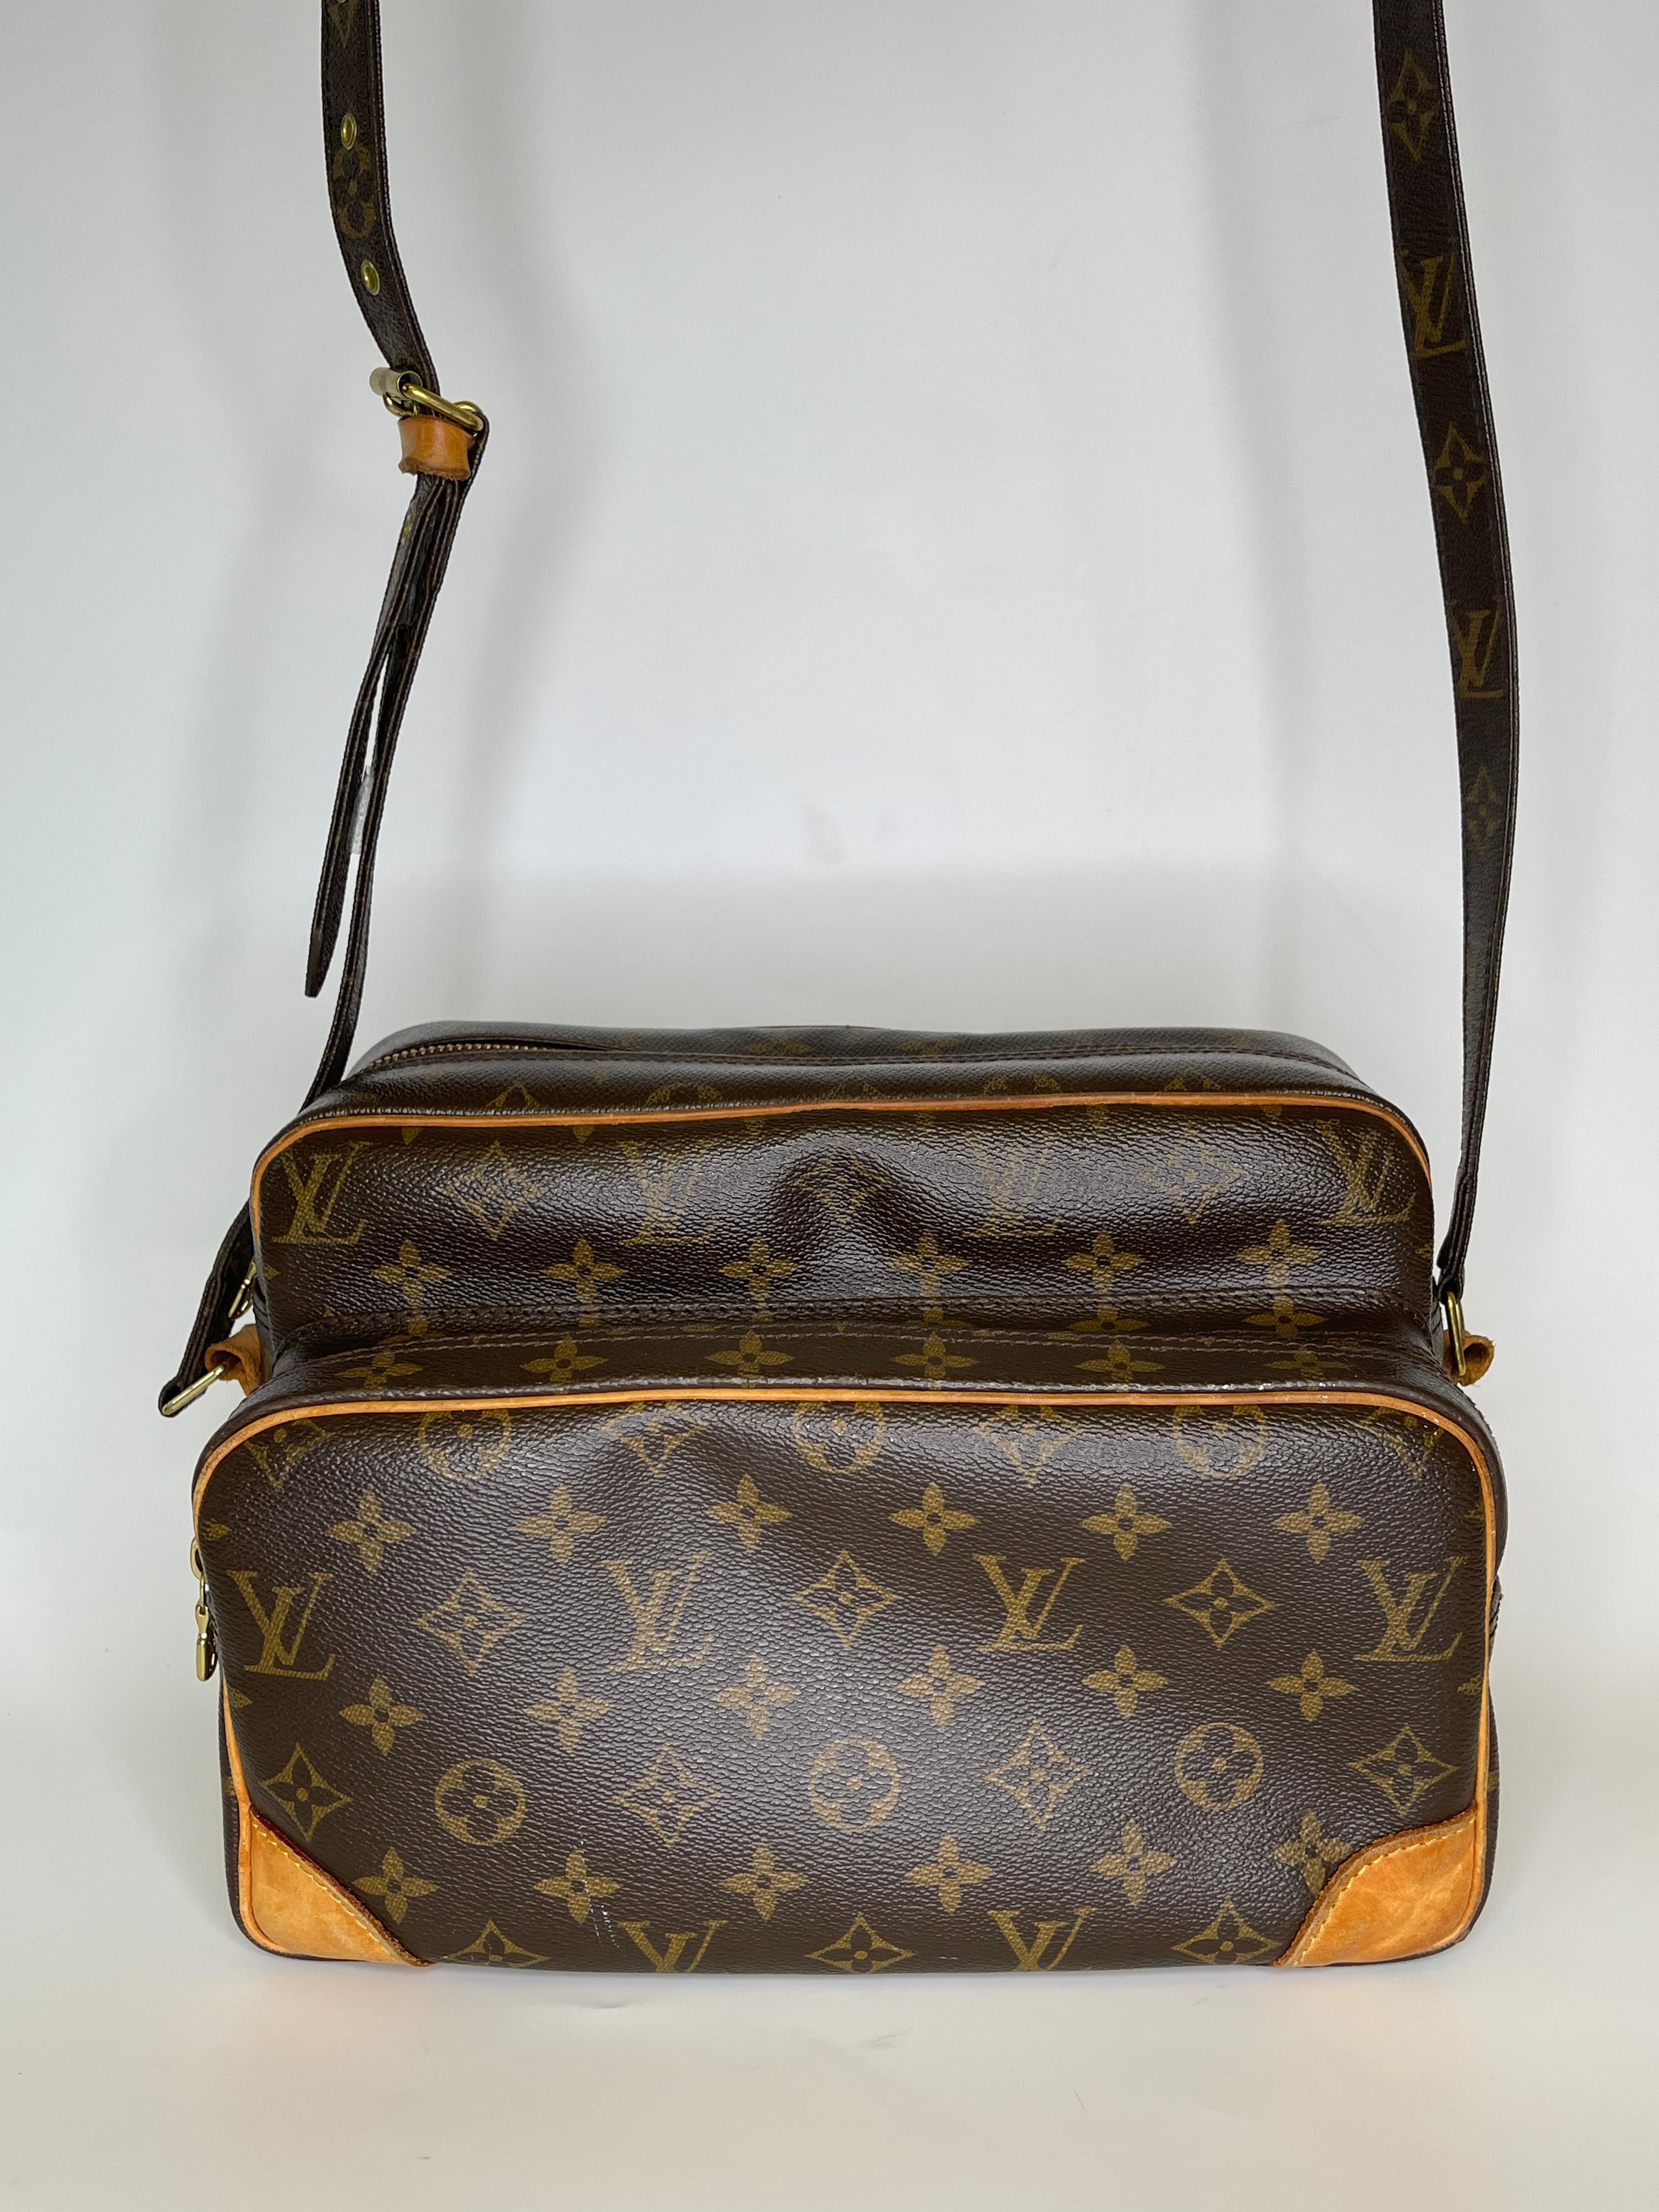 Authentic vintage Louis Vuitton shoulder bag. Made with coded canvas, vechetta leather darkening on the trim. Eclair zippers, main compartment with one zipped closure on one side and a pocket on the other. 

COLOR: Brown monogram 
MATERIAL: Coated